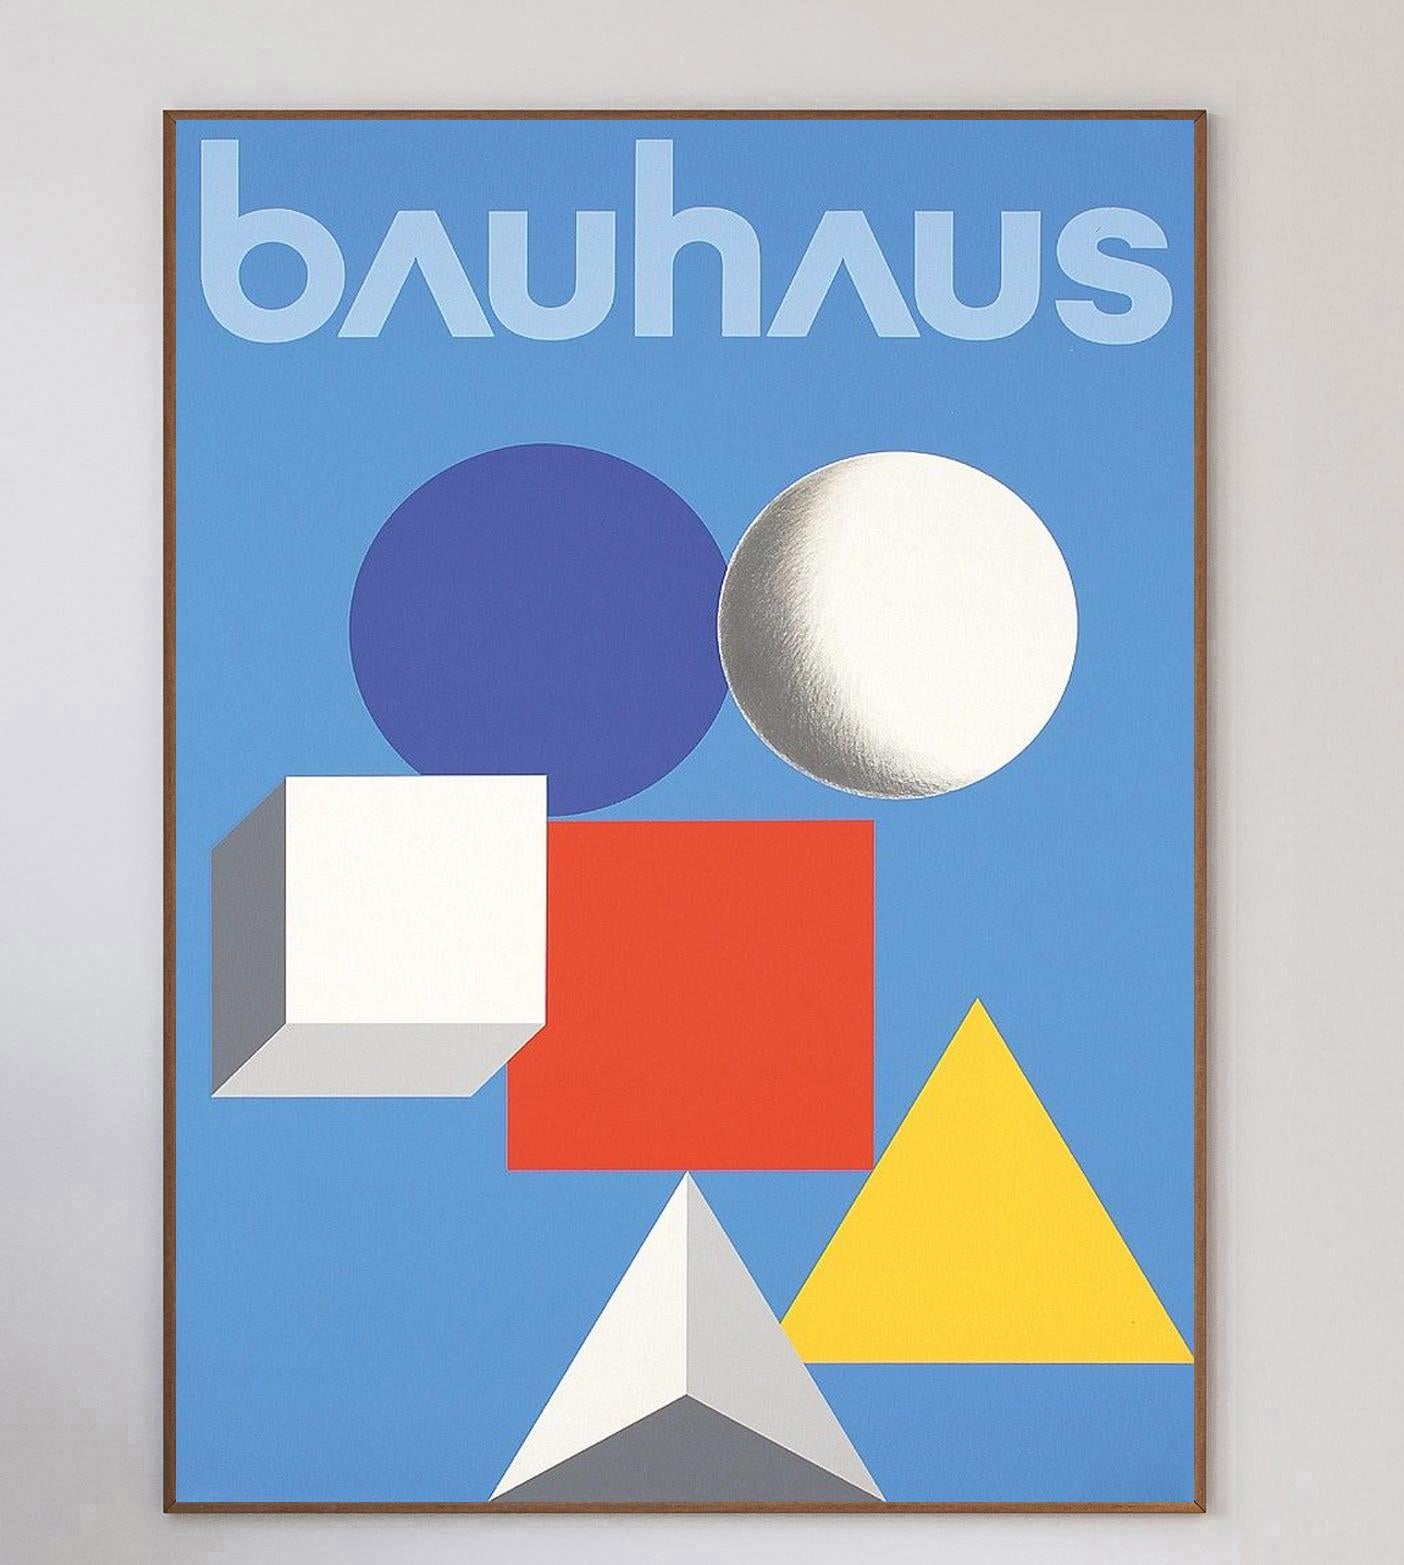 Austrian-American designer Herbert Bayer was one of Bauhaus' most influential students & teachers. Founded by Walter Gropius in 1919, the German art school ran for only 14 years however its impact and influence on art & design in the 20th century